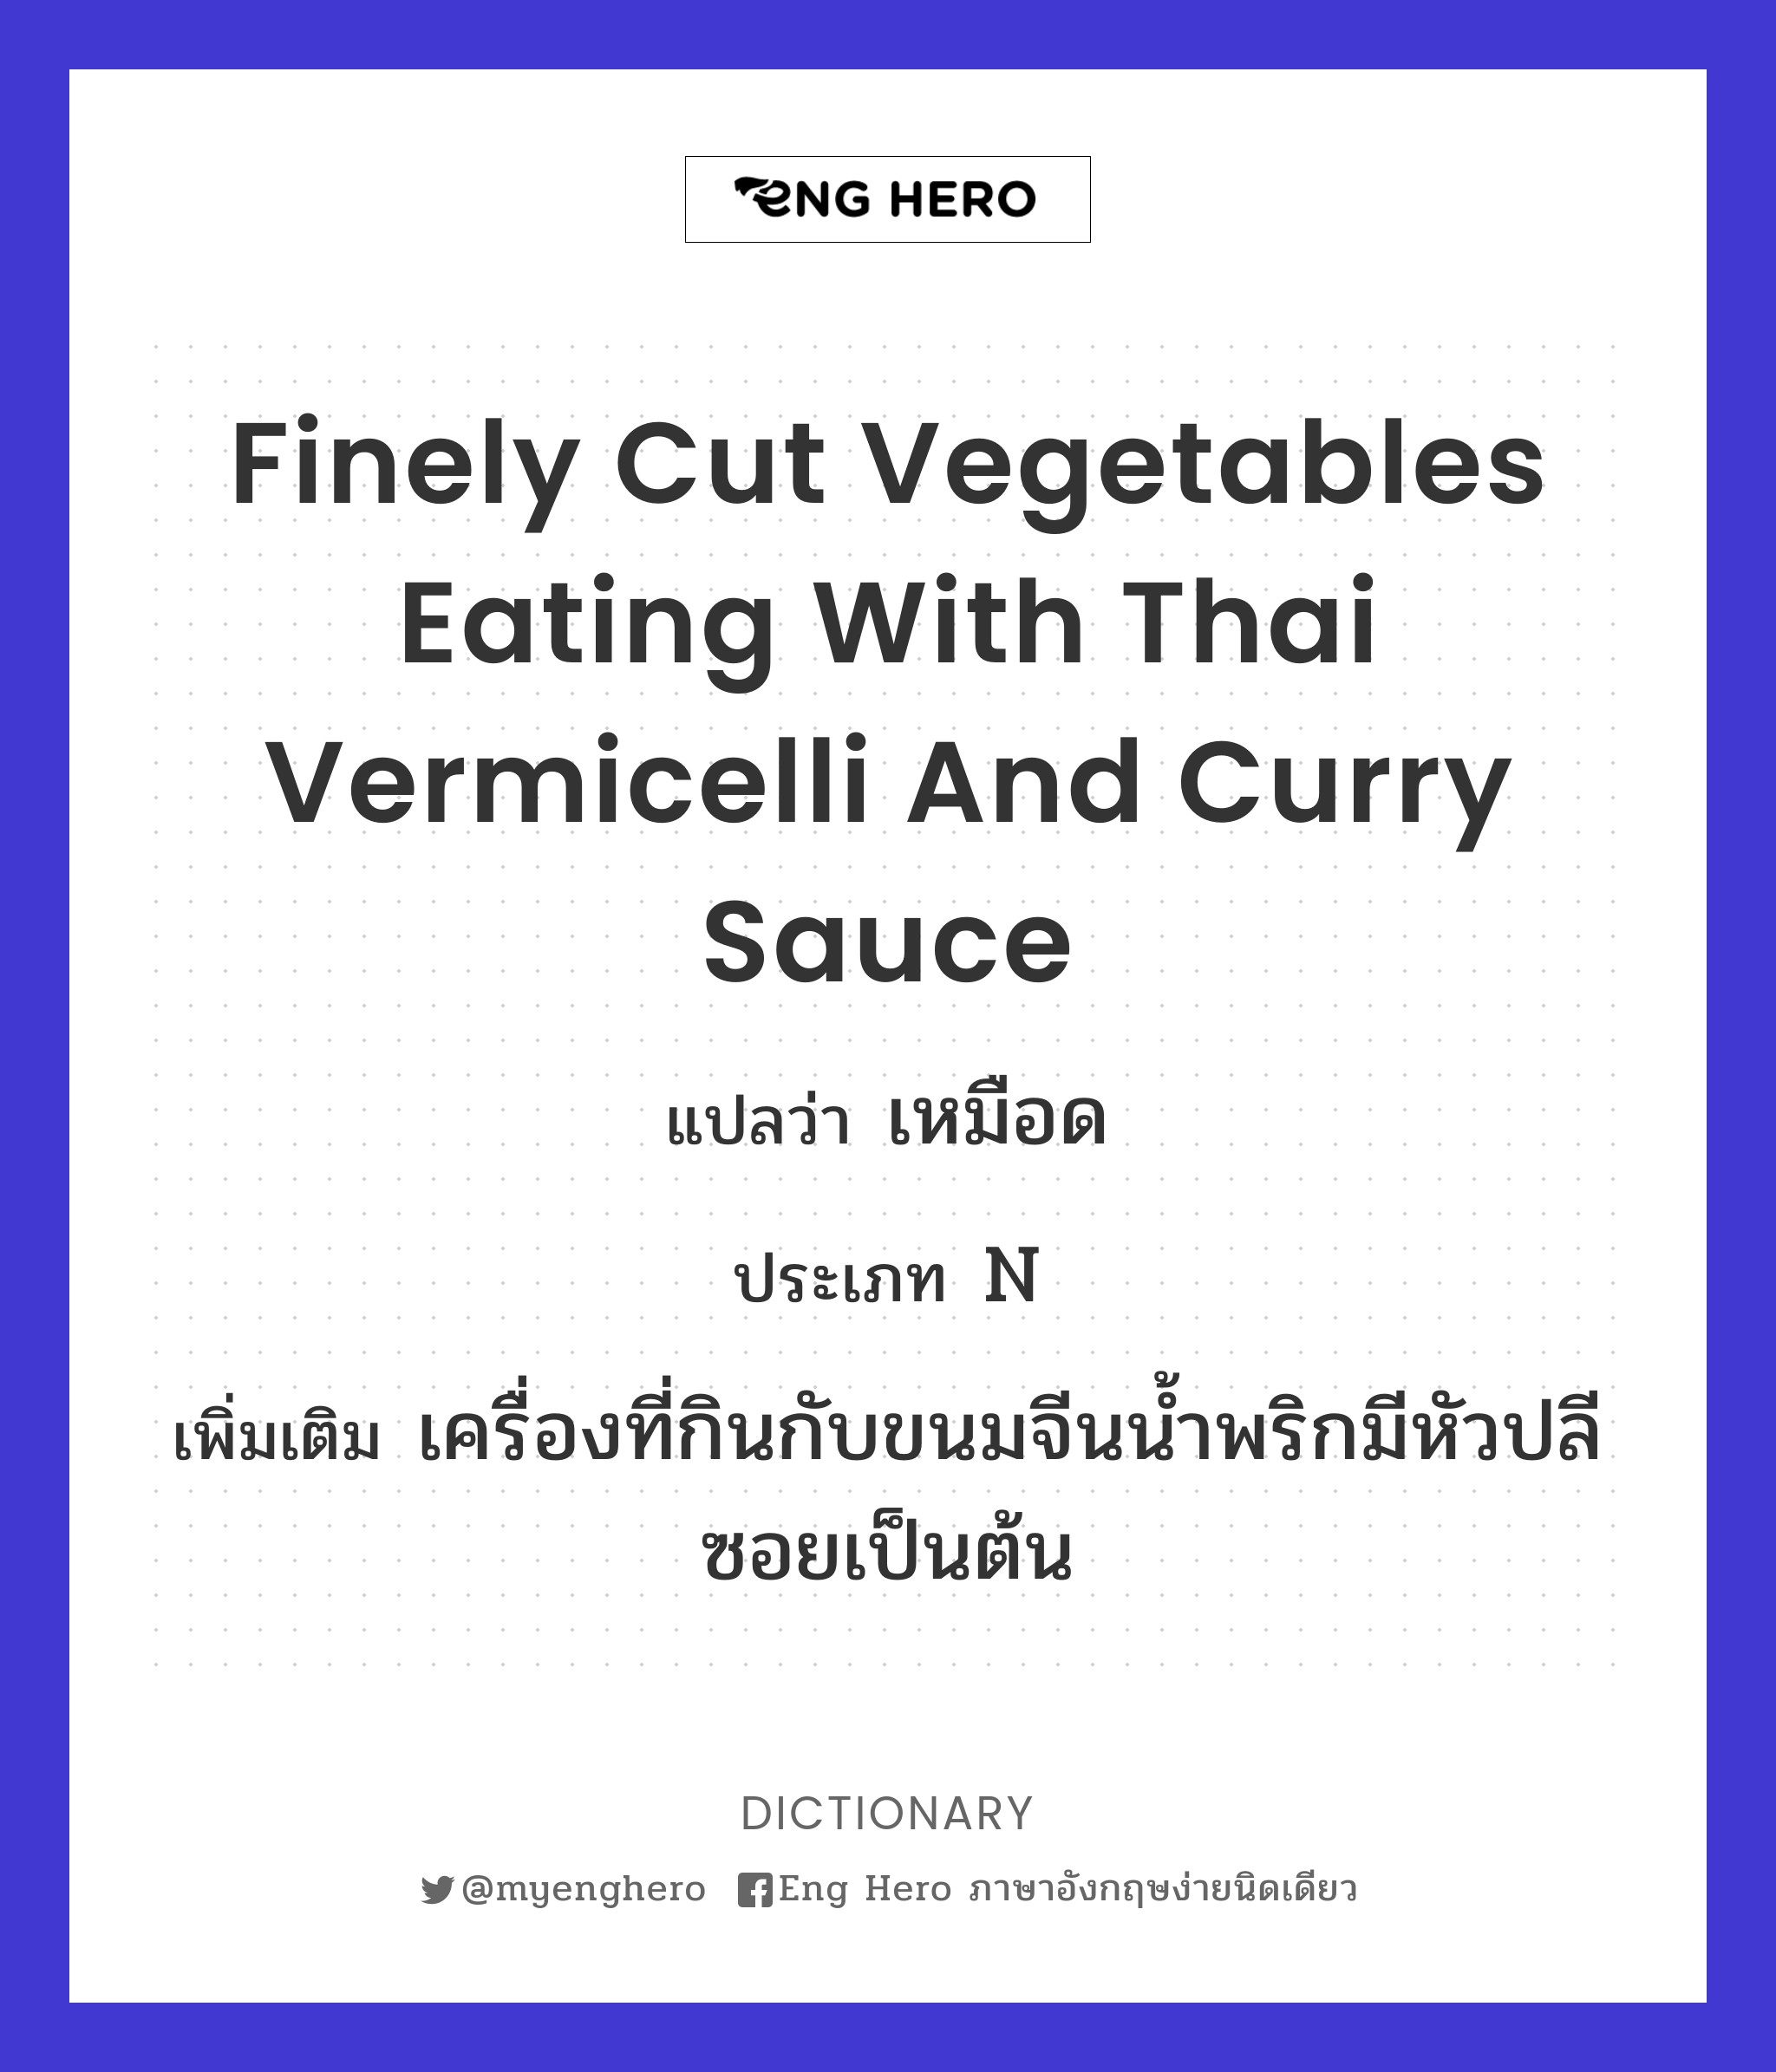 finely cut vegetables eating with Thai vermicelli and curry sauce